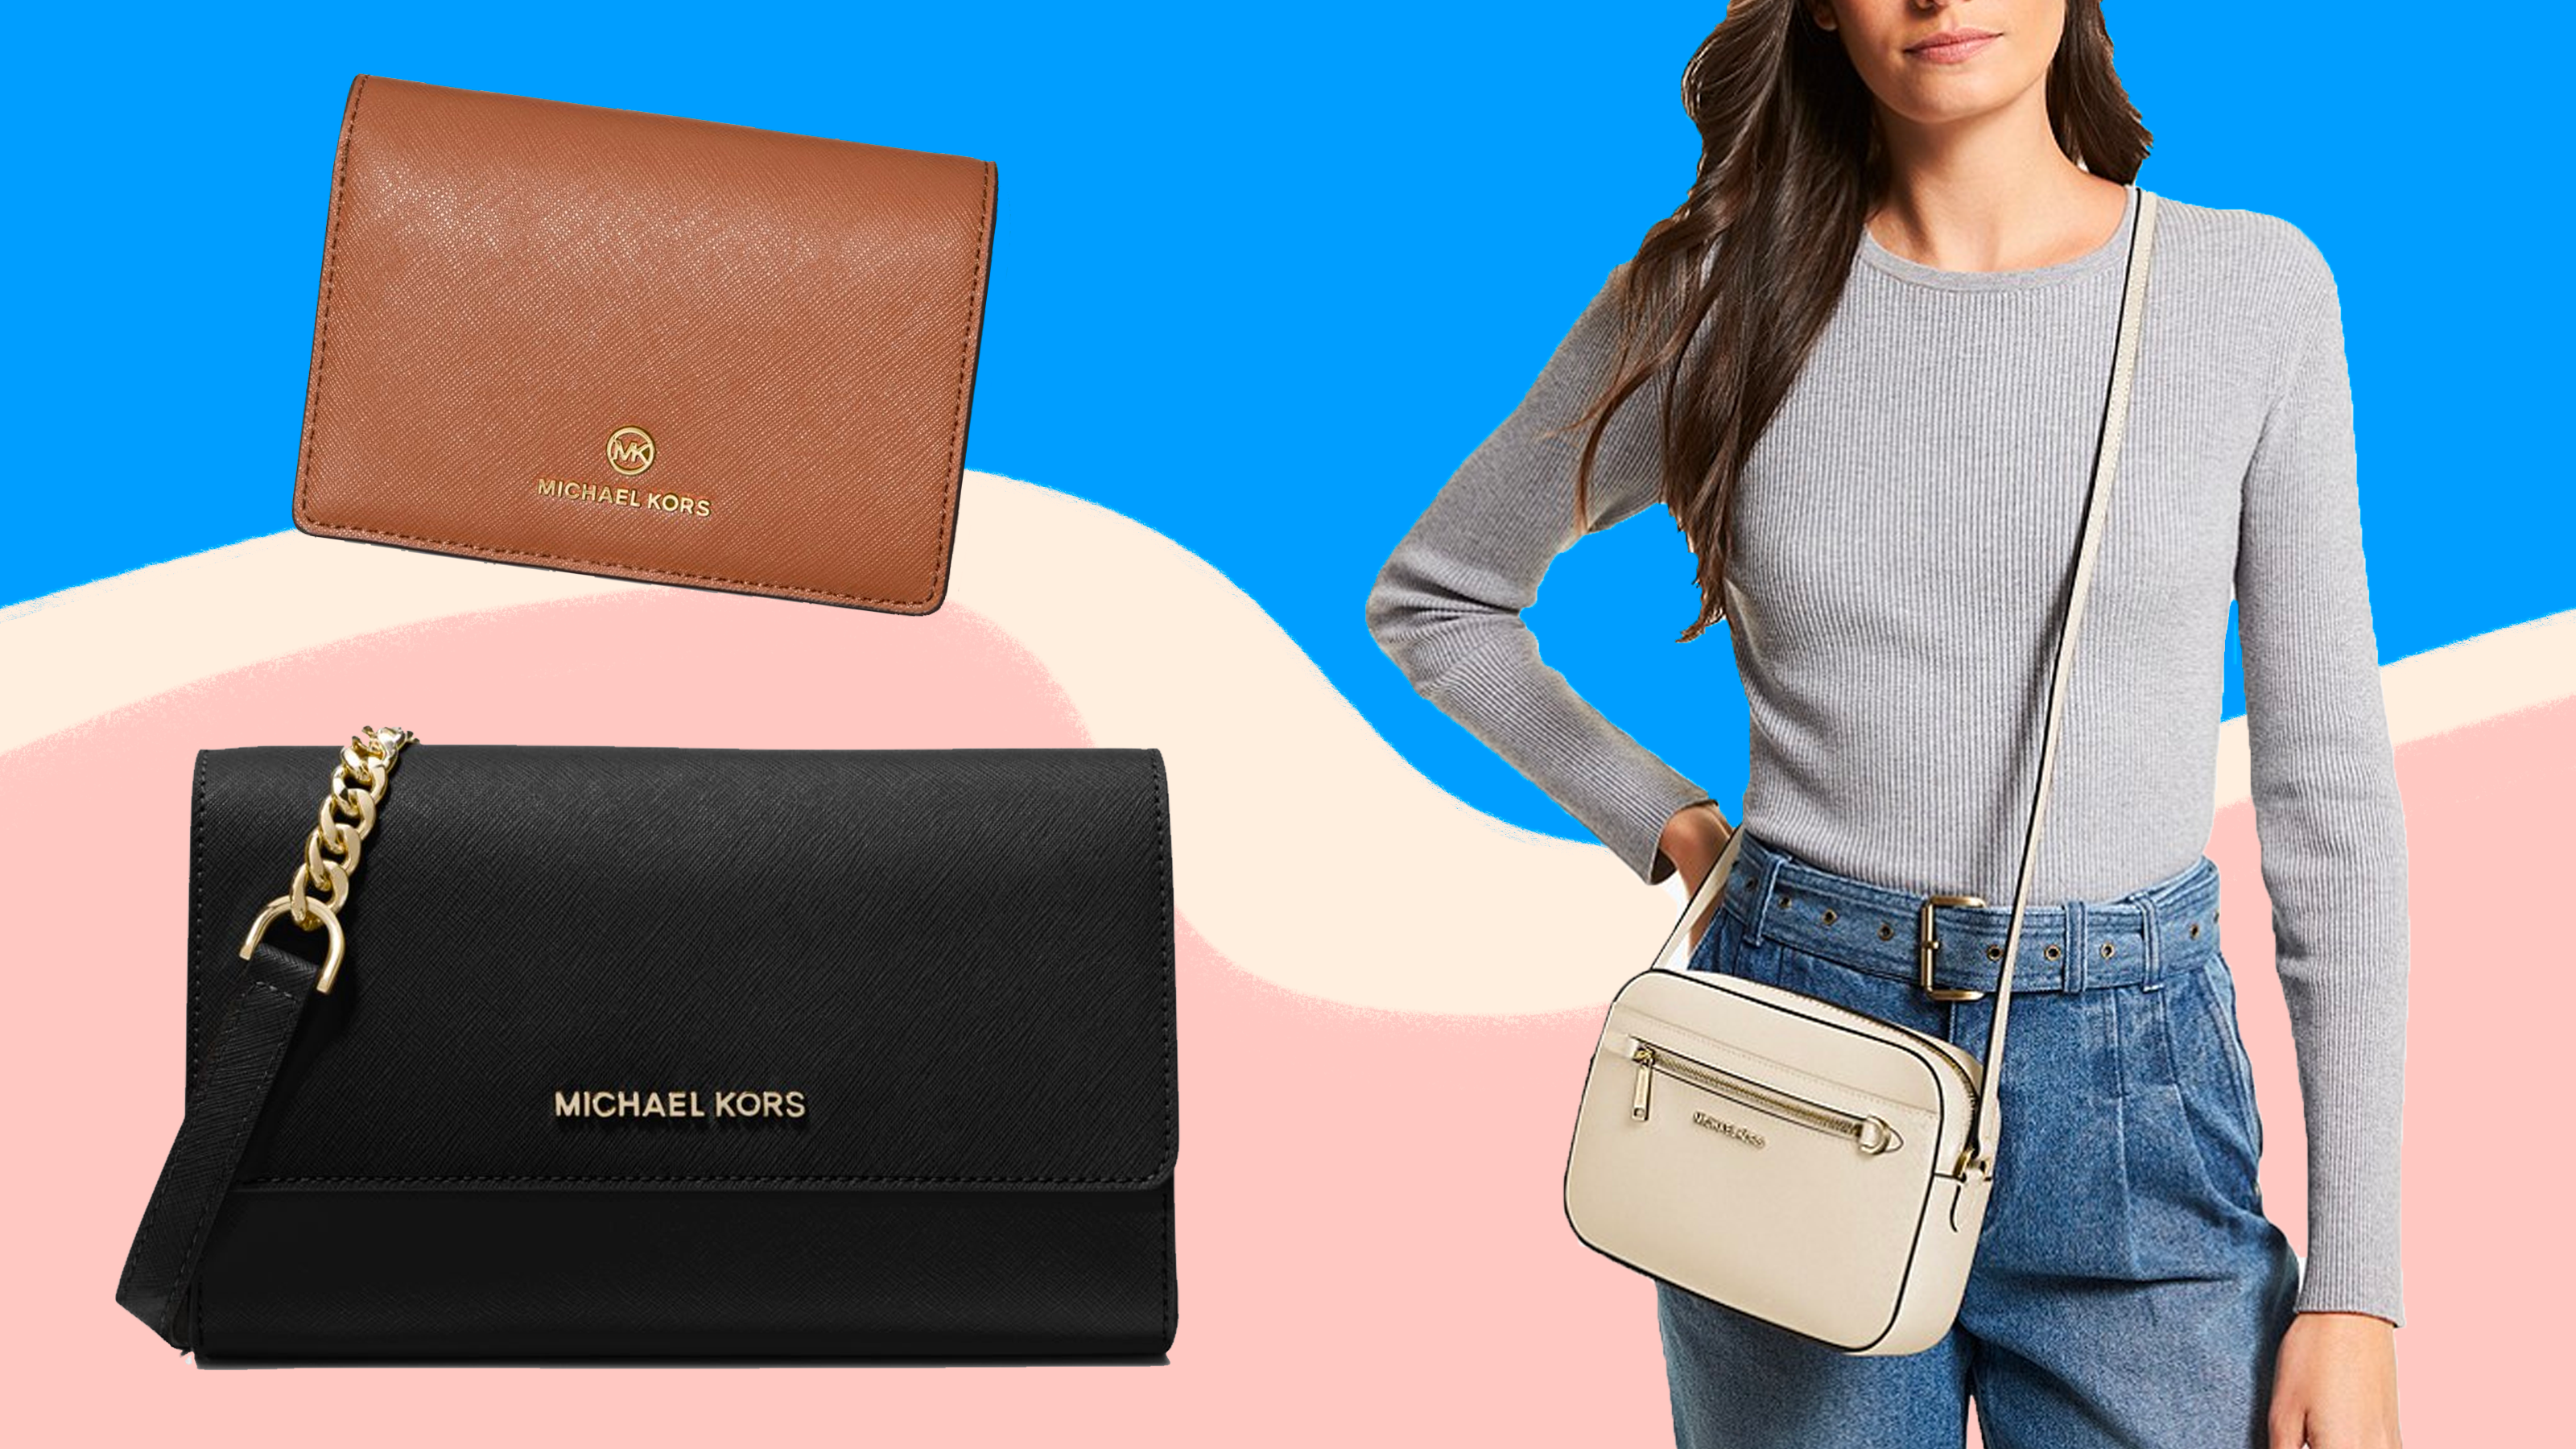 sagging Rationalisering kim Michael Kors: Get a purse for a massive markdown right now